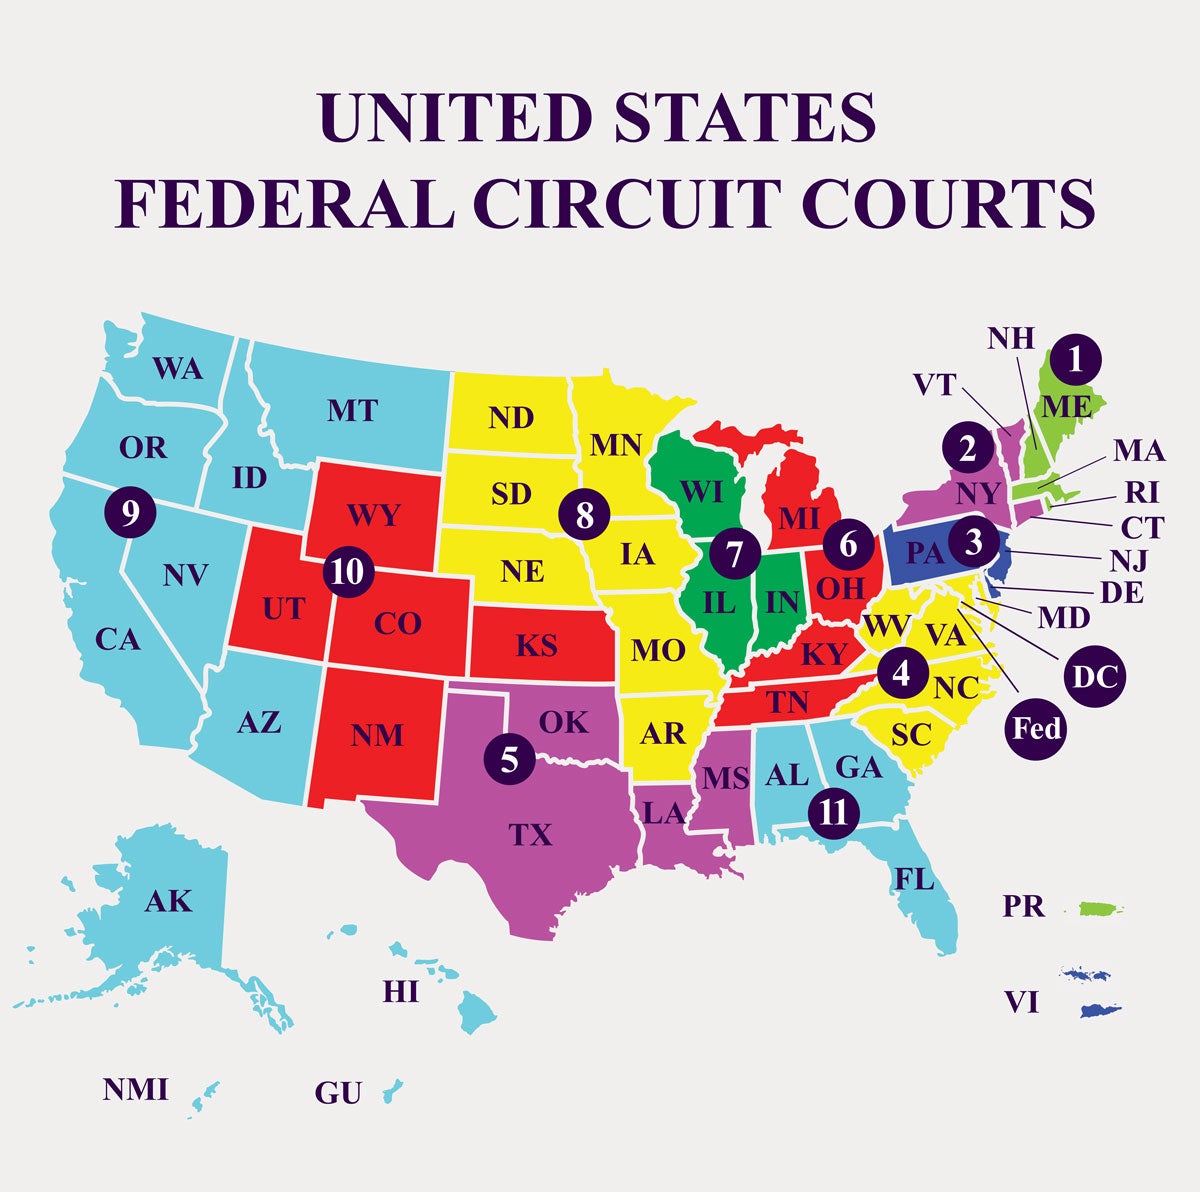 federal circuit courts of america